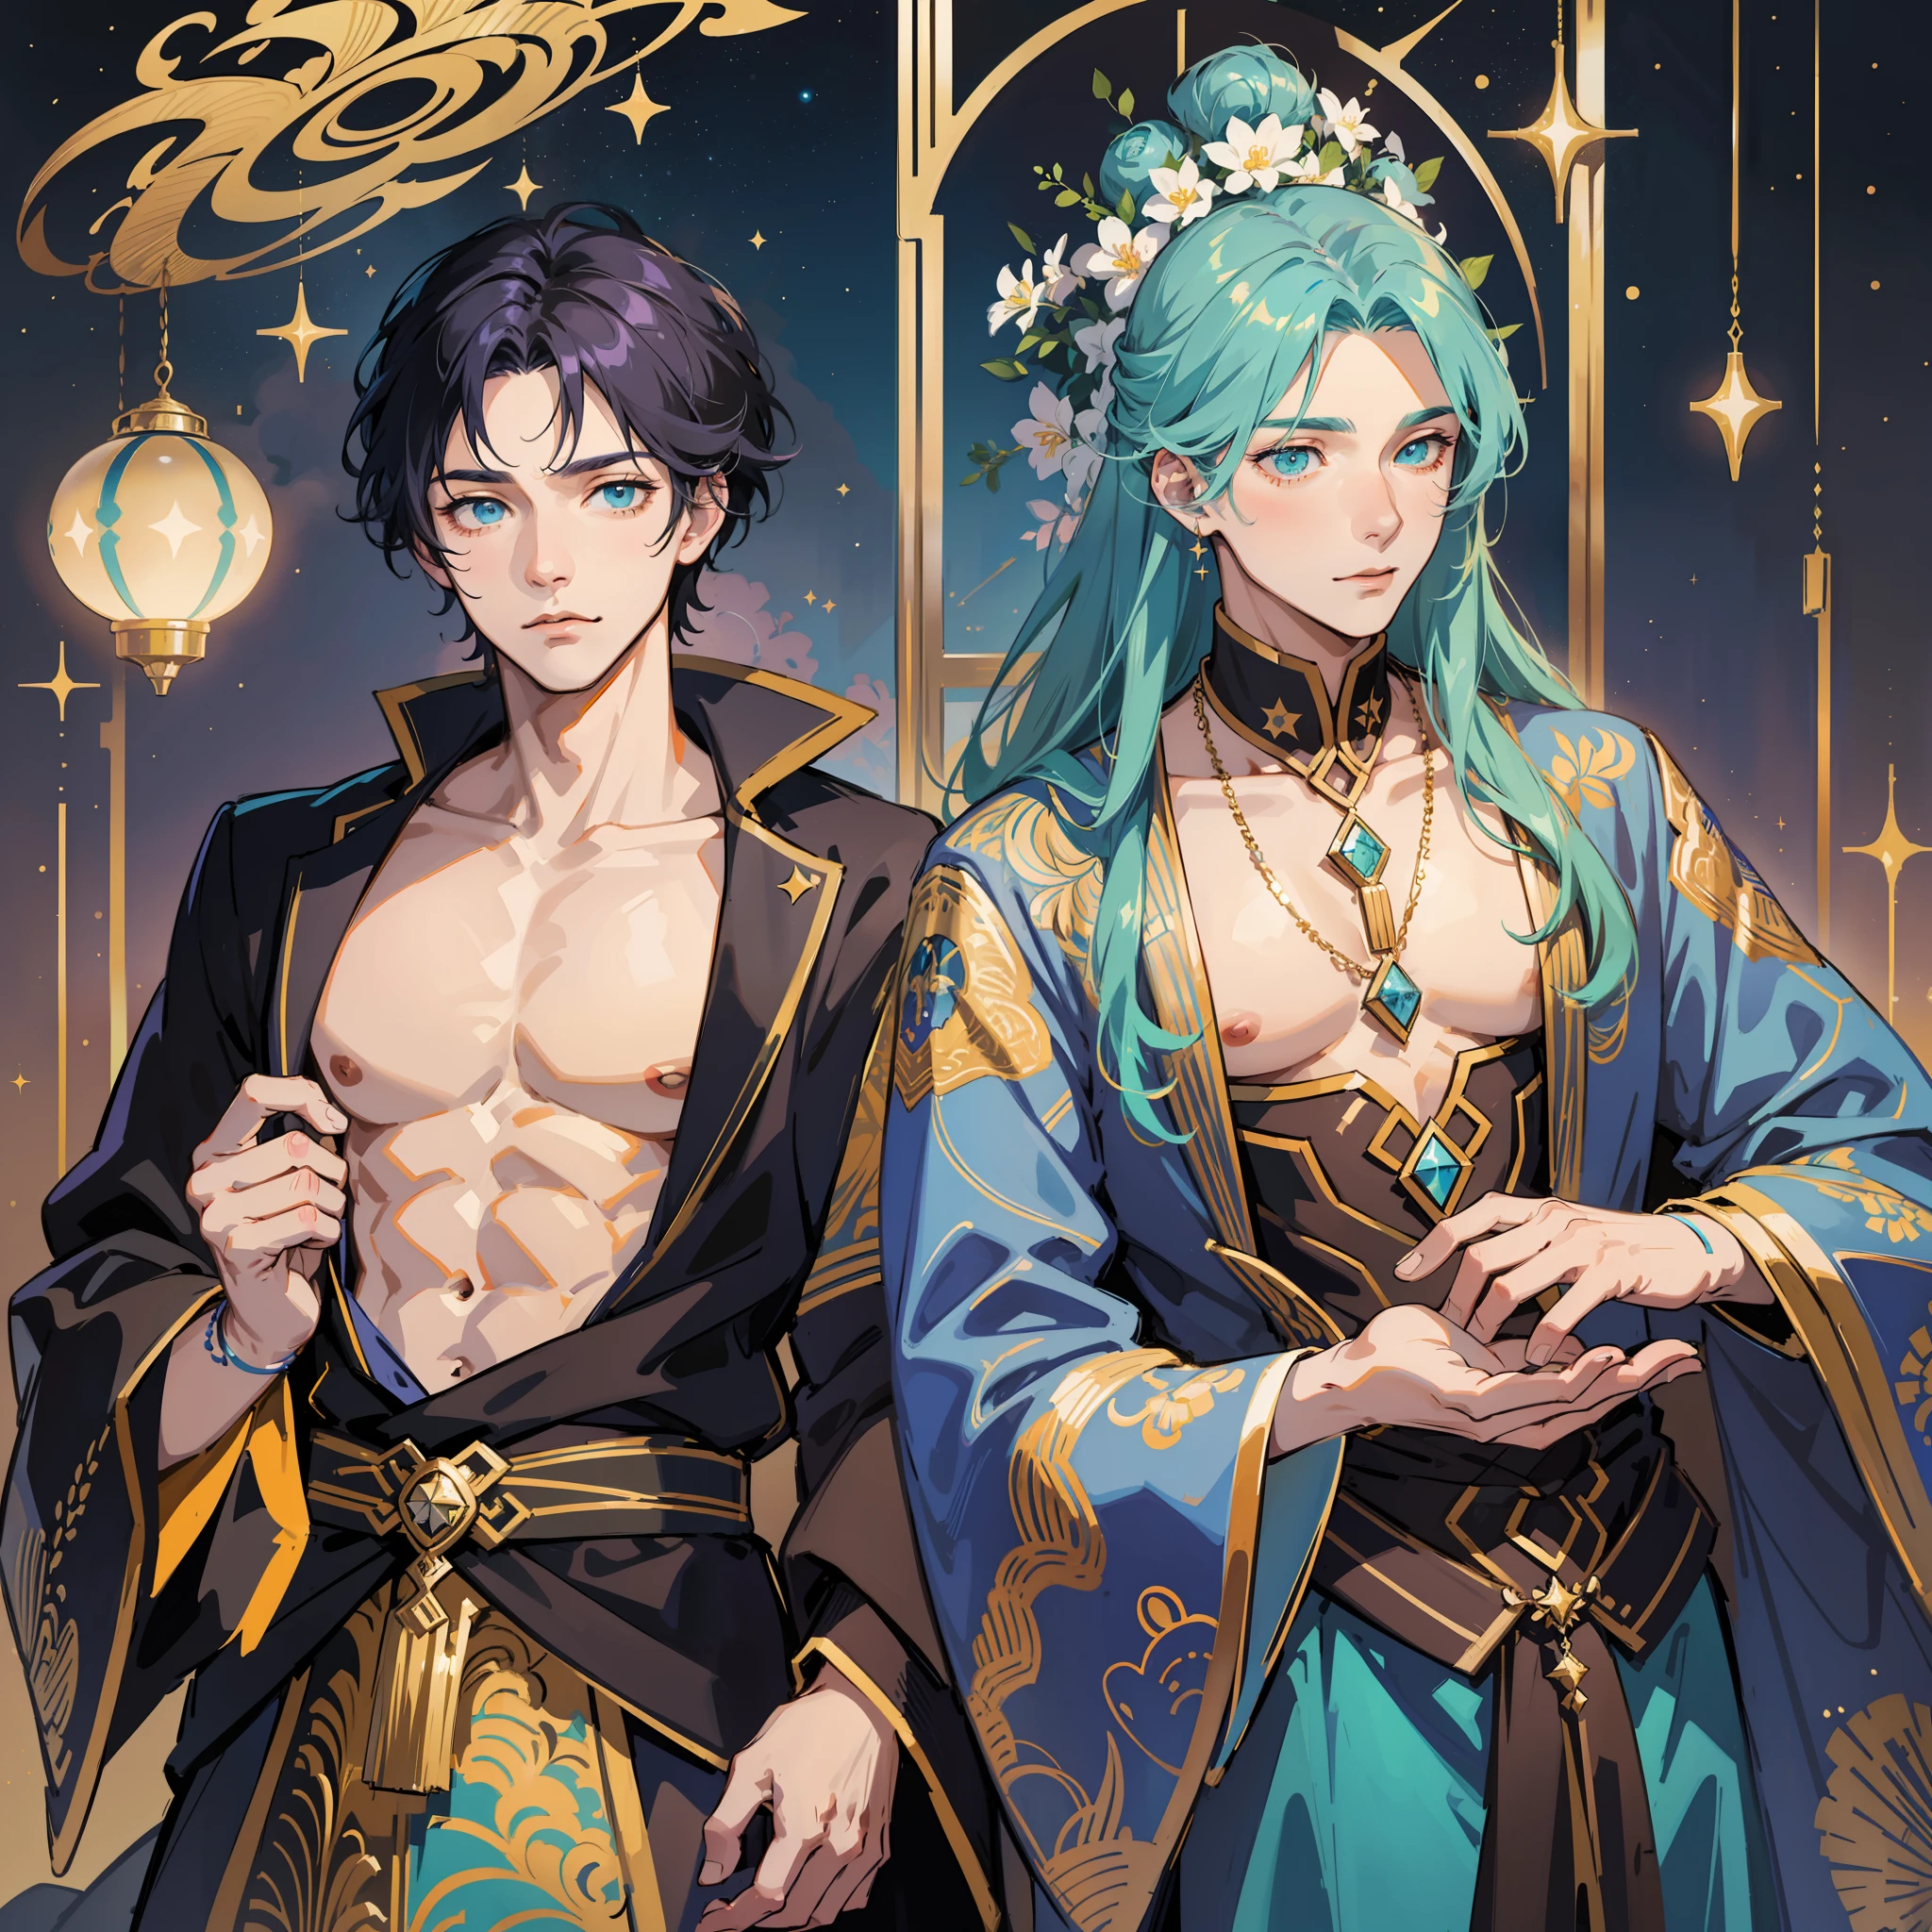 BL, two handsome, two boys, a boy with turquoise long hair and a boy with short lavender hair, masculine features, masculine body, muscular boys, pectoralis major, abs, star ornaments, space ornaments, beautiful, beautiful, colorful, fantasy, fantastic, mixture of medieval European aristocratic clothes and kimono, luxurious costumes, cuddling figures, sky with shining stars, constellations, two people floating in the air, Fantastic sky